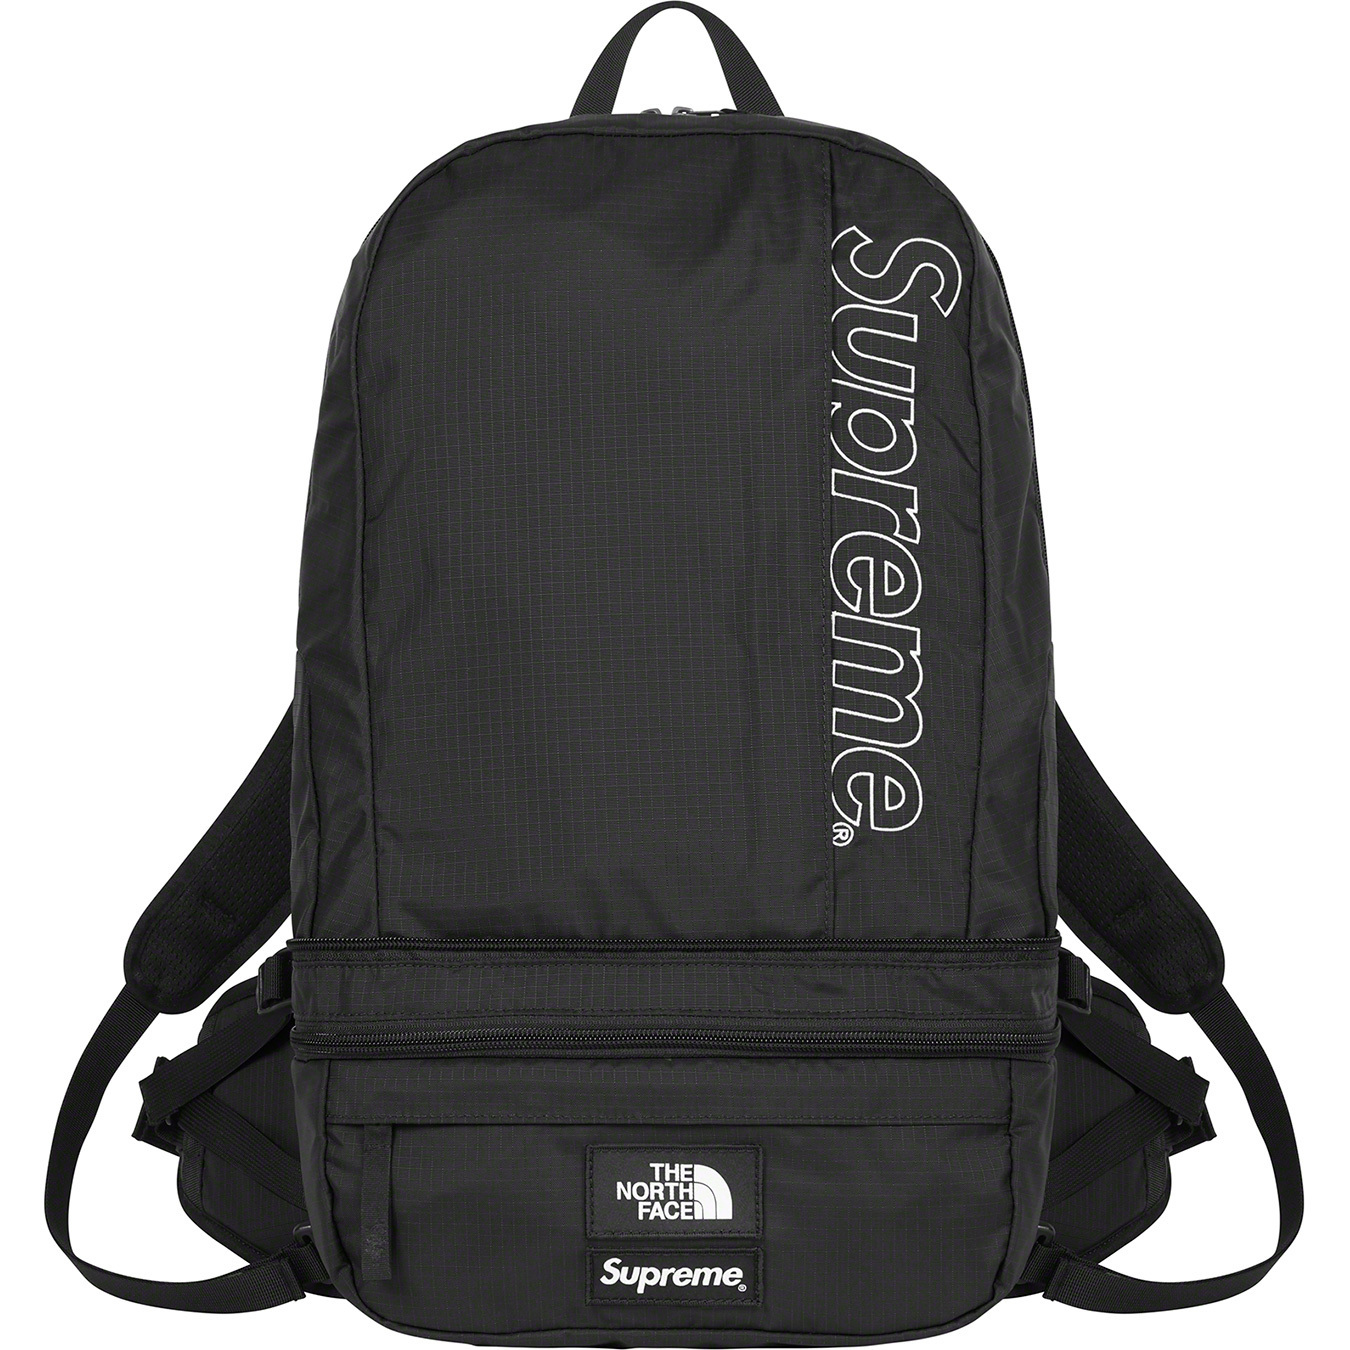 Supreme/The North Face Trekking Convertible Backpack + Waist